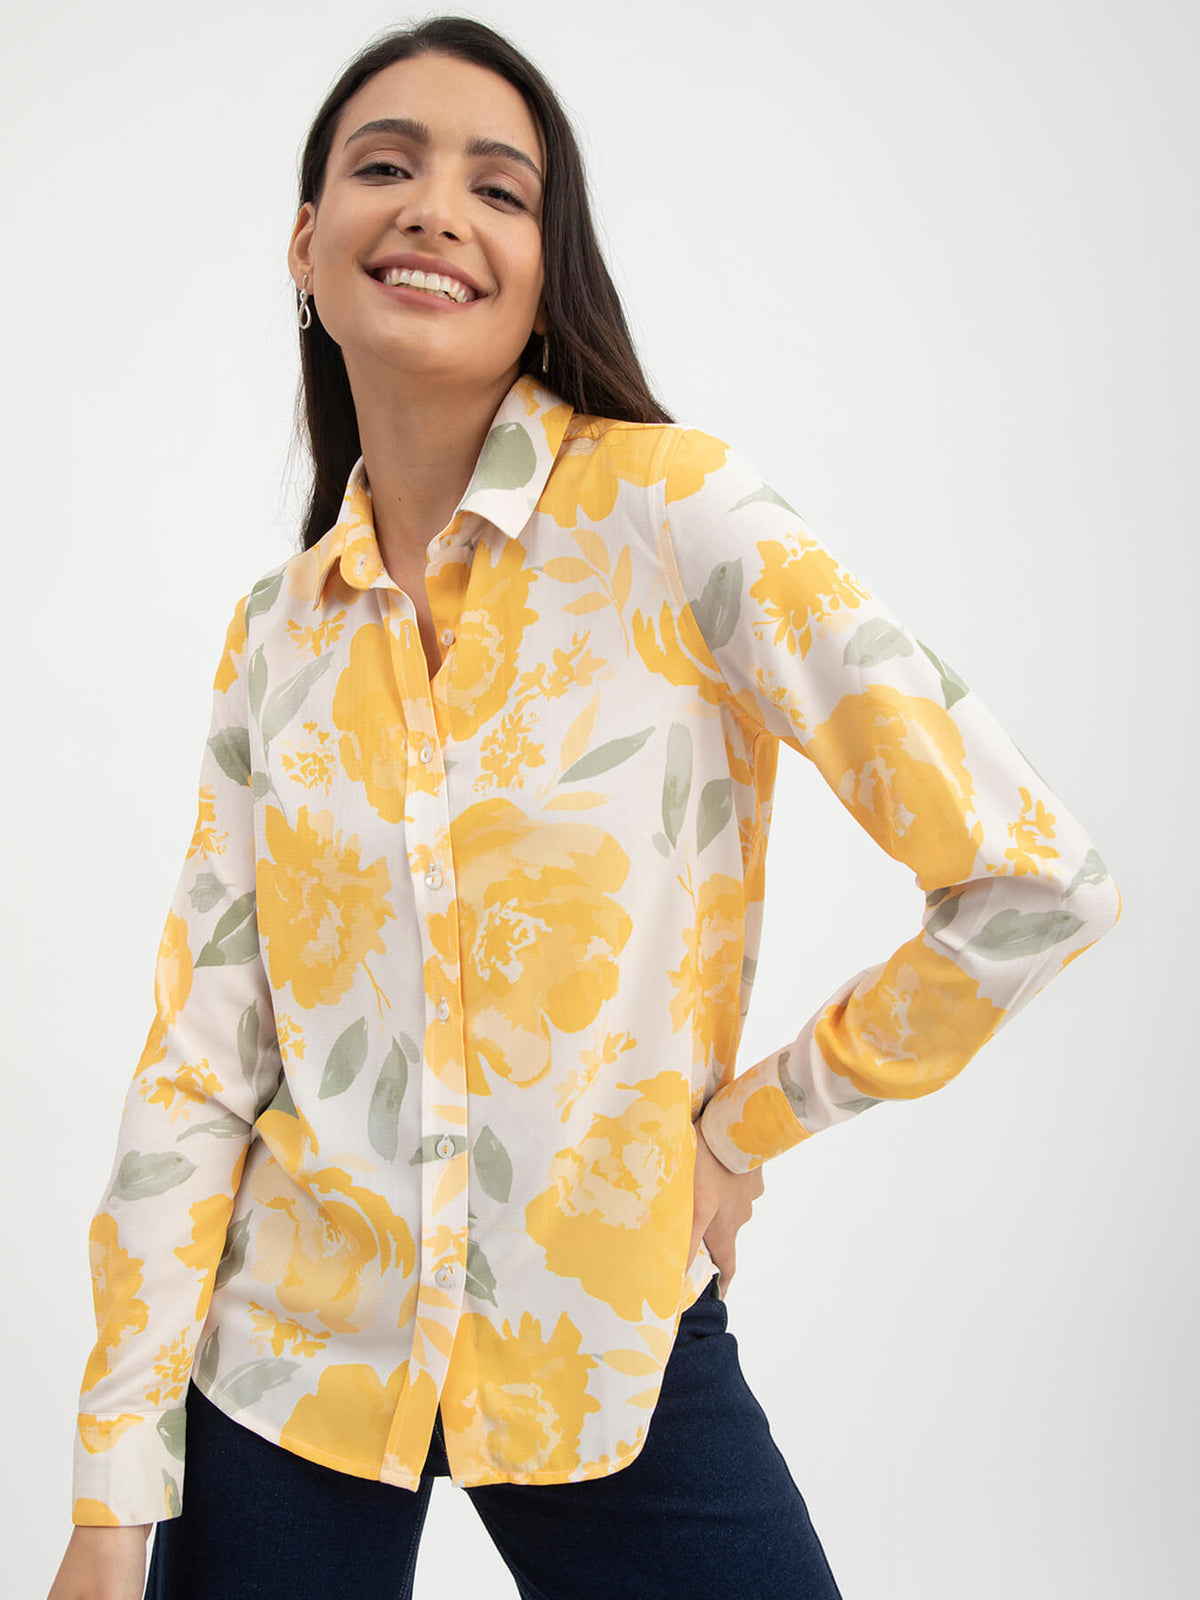 Floral Print Collared Shirt - White And Yellow